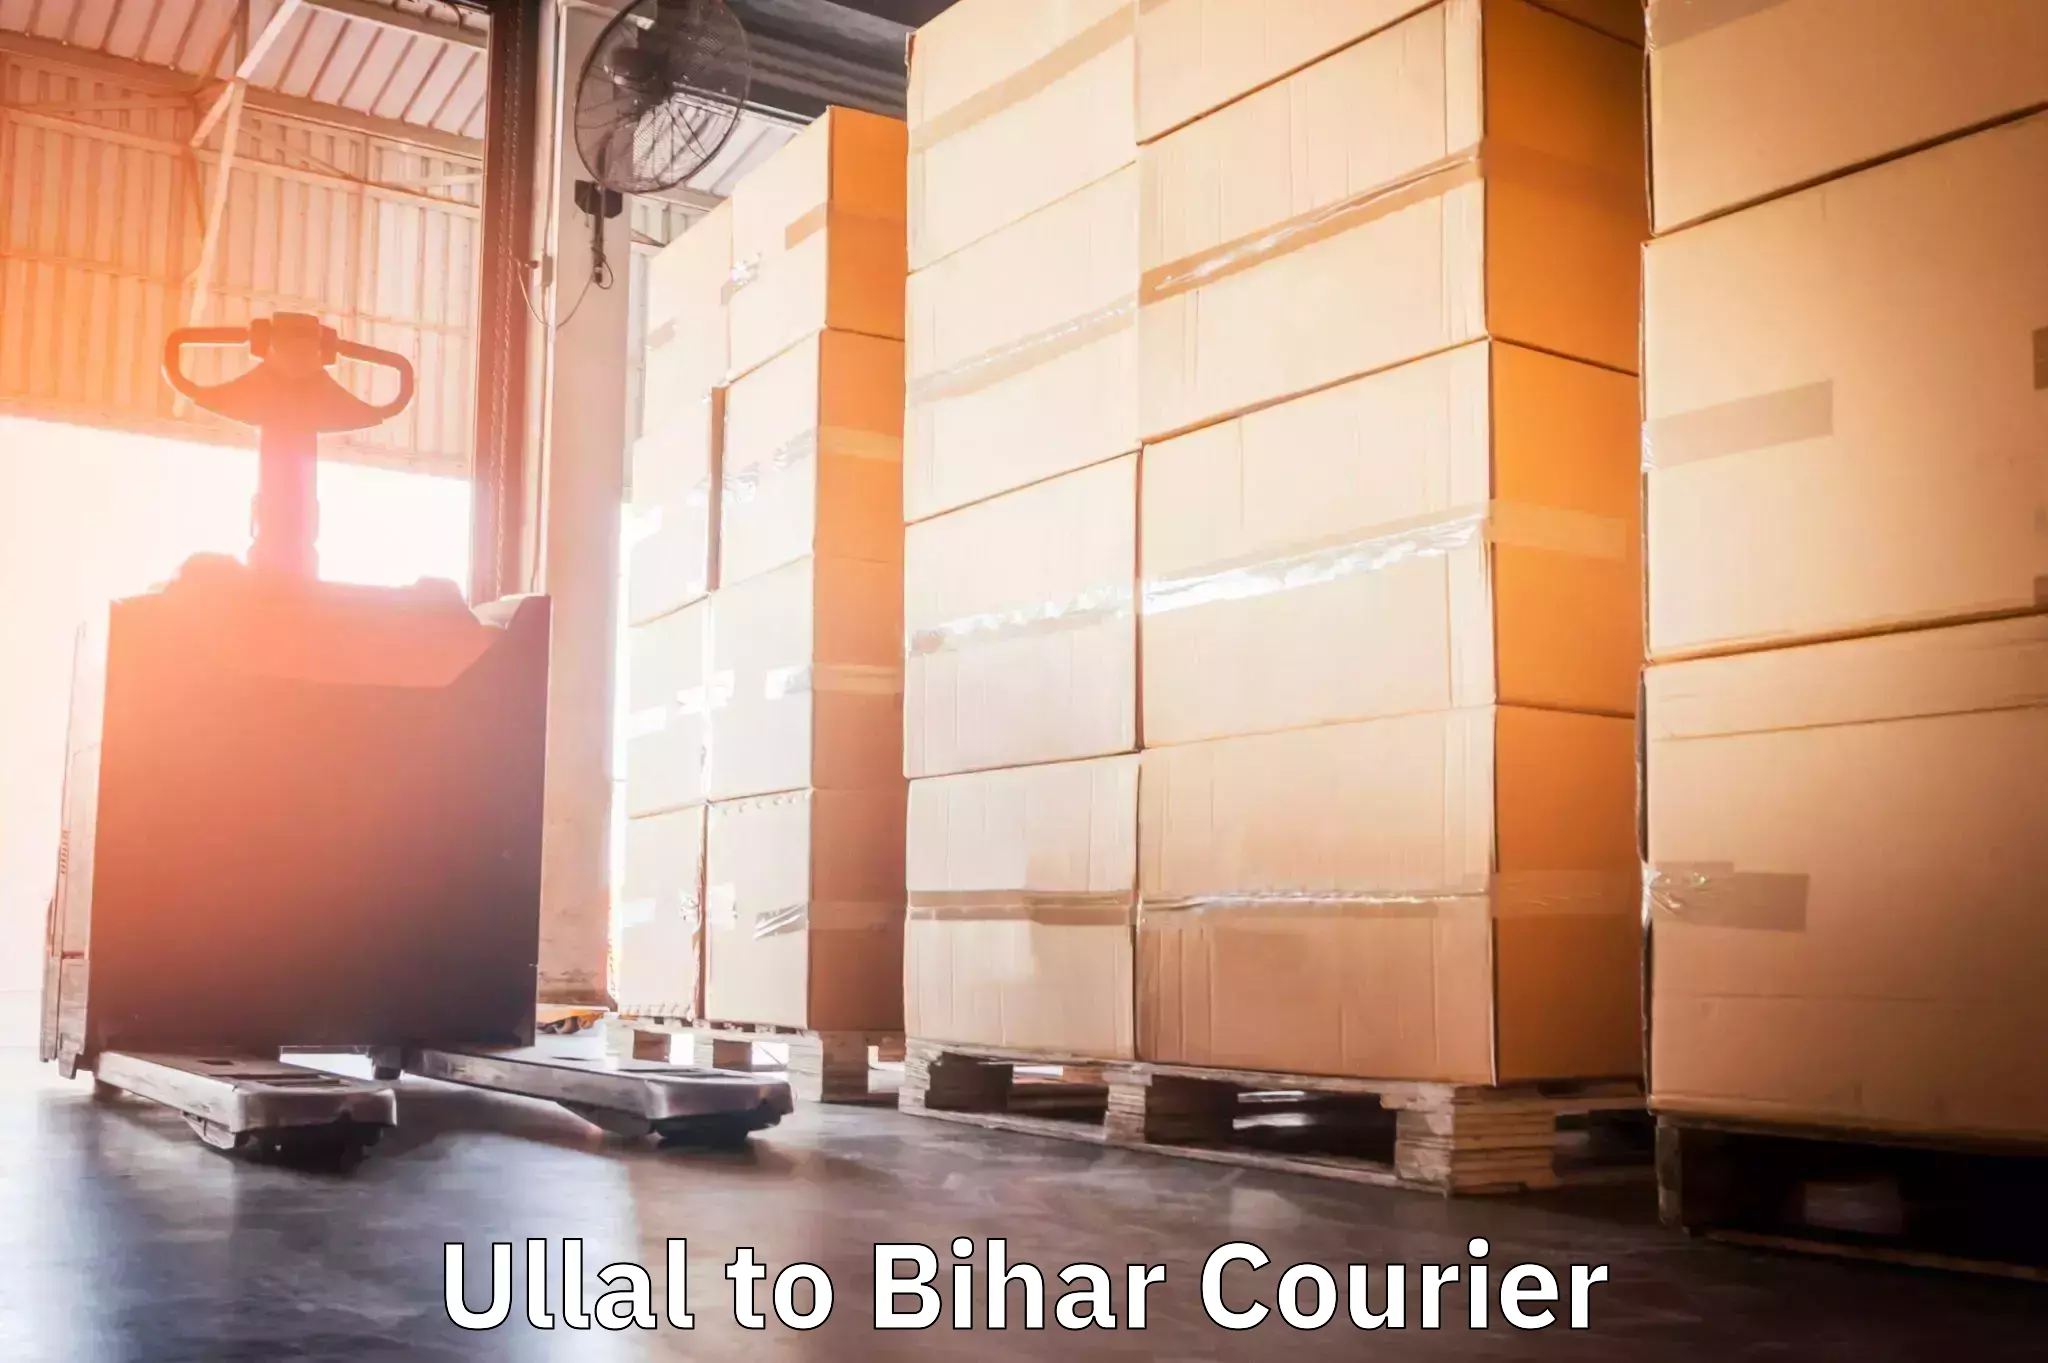 Courier service innovation Ullal to Bihar